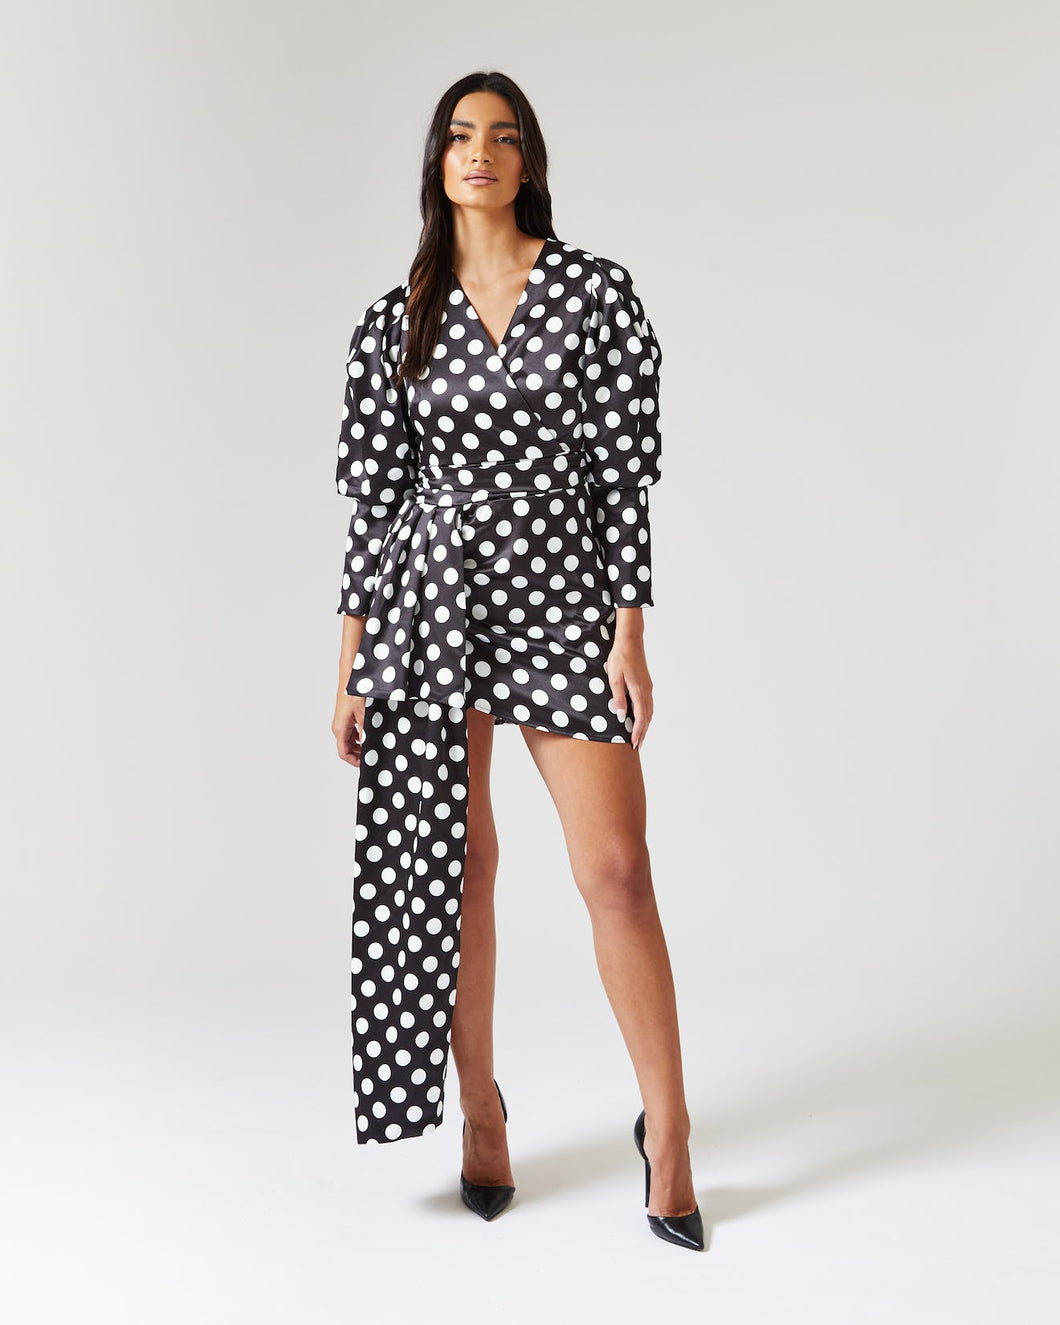 BLACK AND WHITE POLKA DOT MINI DRESS WITH PUFF SLEEVES AND DRAPE DETAIL